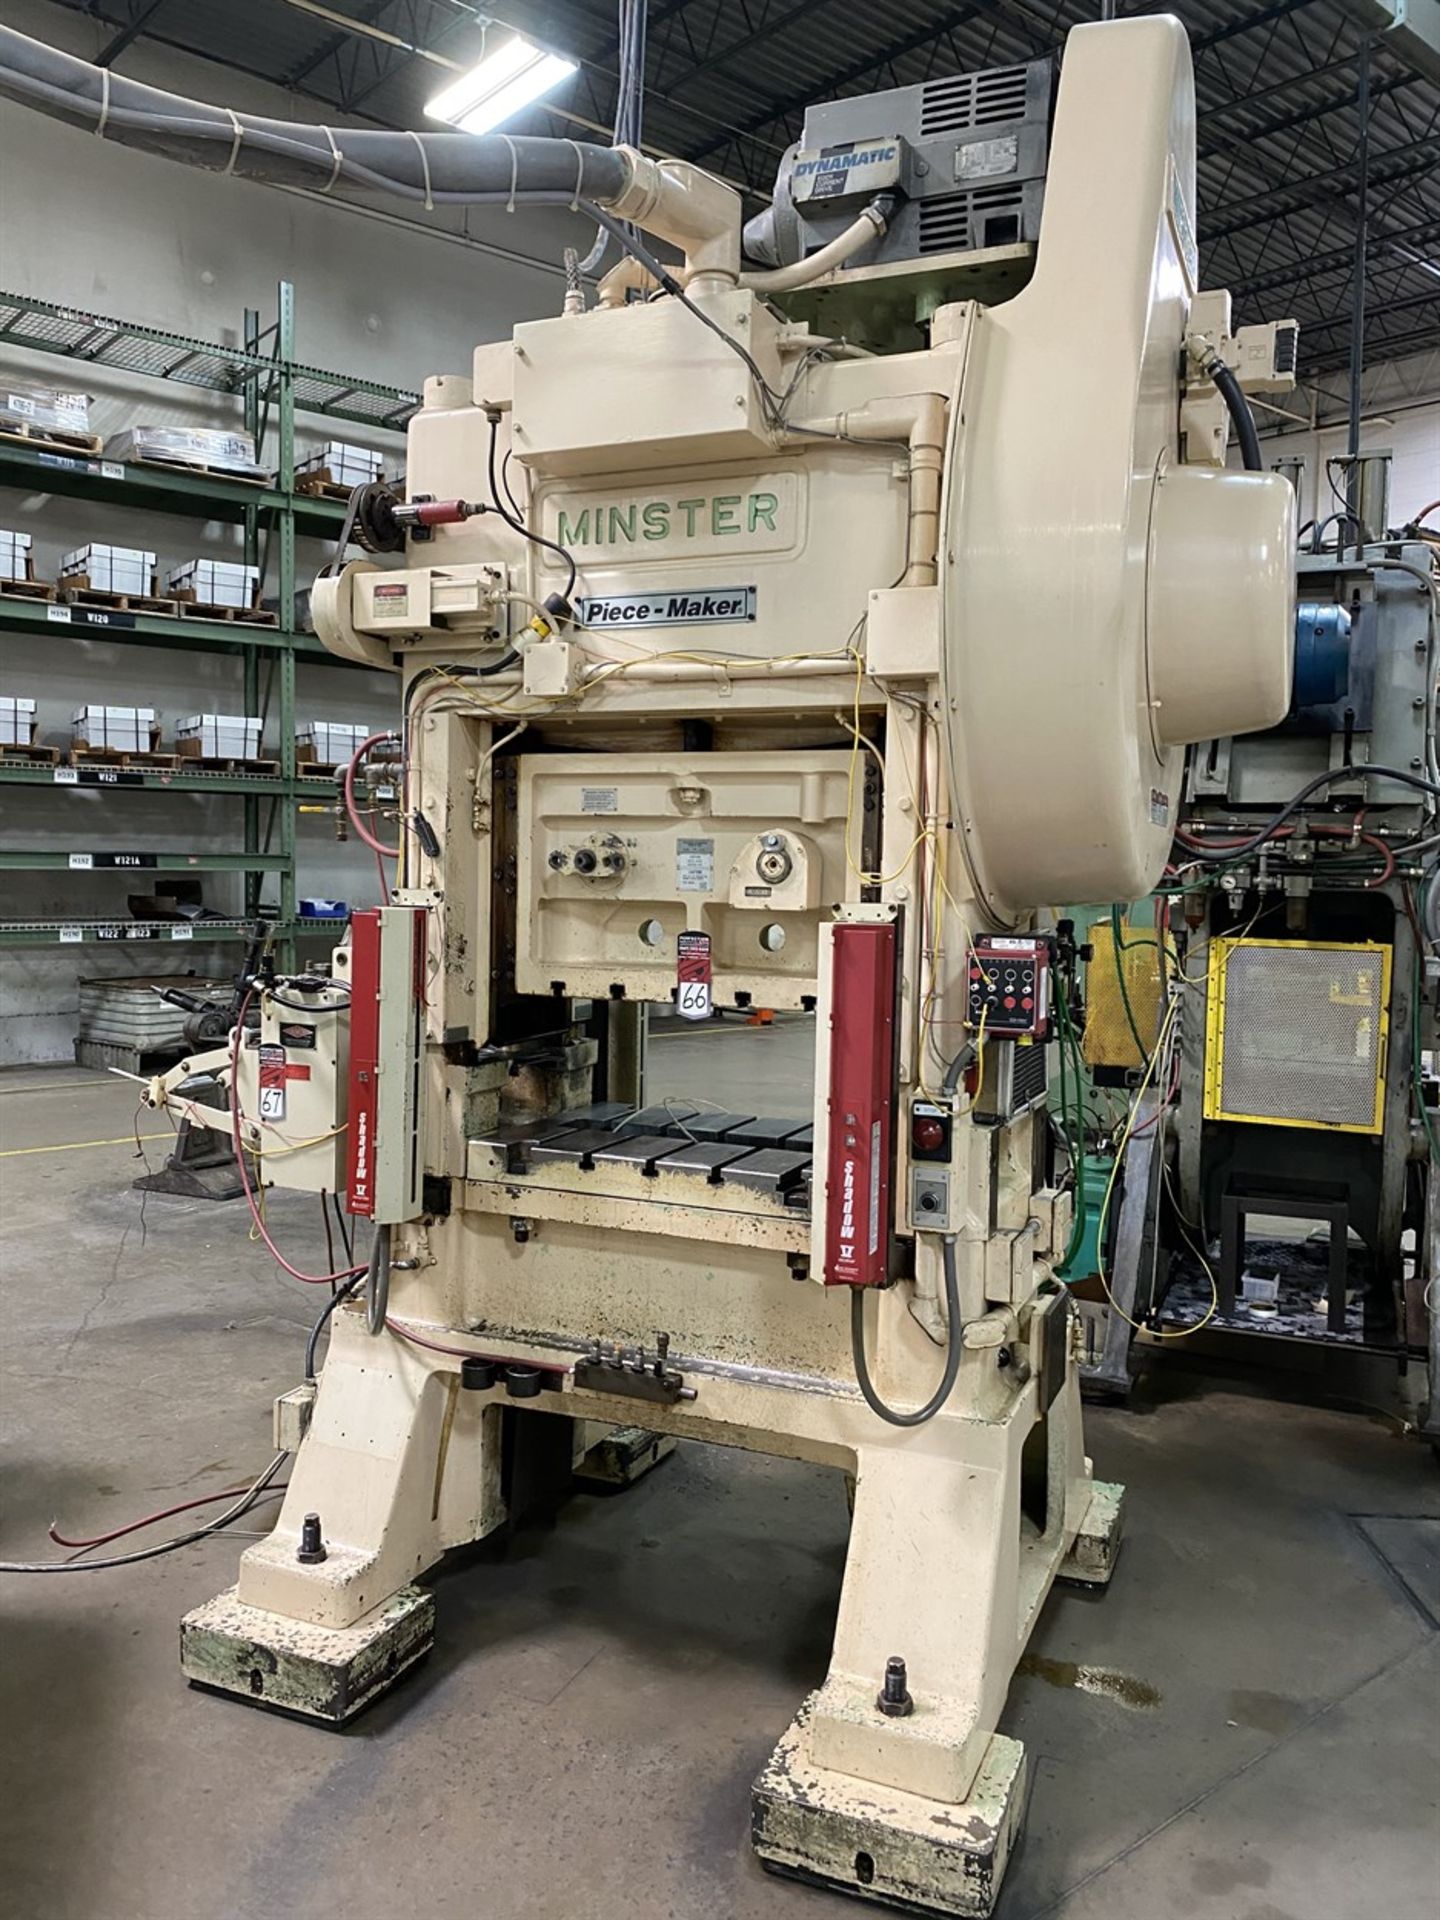 MINSTER P2-60 Piece-Maker High Speed Press, s/n P2-60-28198, 60 Ton Capacity, 36”x 25” Bed - Image 2 of 7